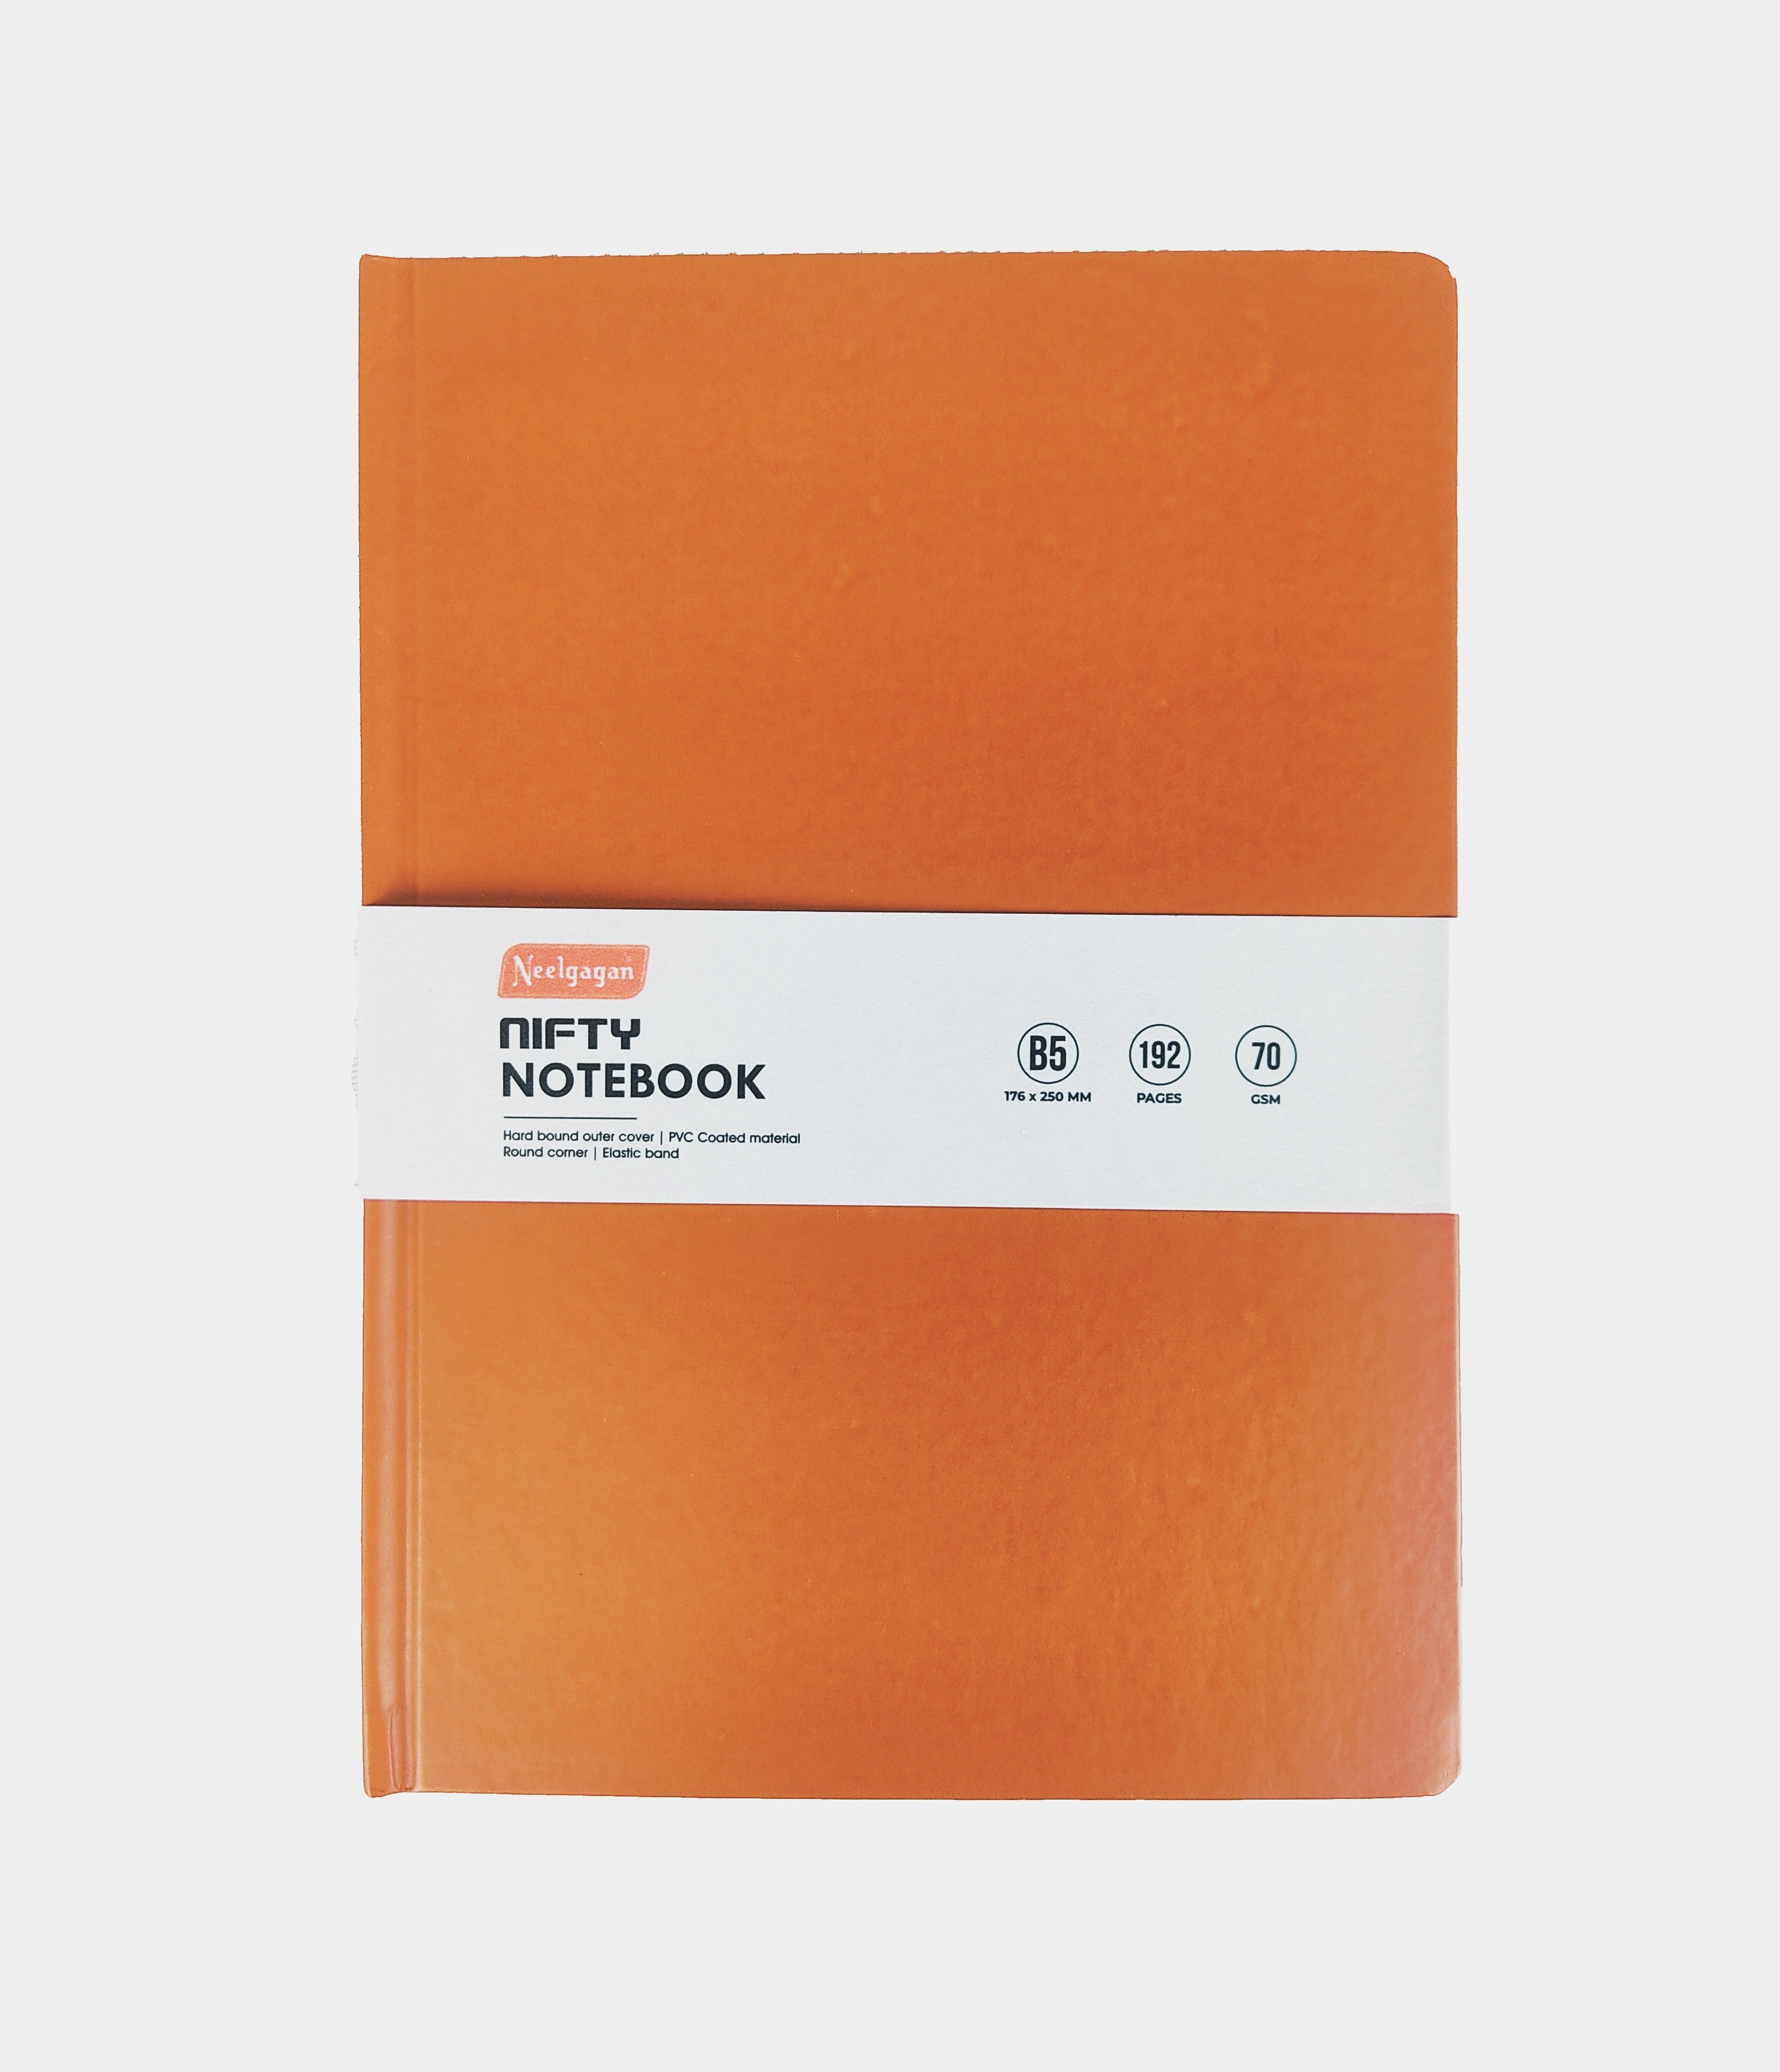 Nifty Notebook – B5 Hard Cover Round Corner (14.8 cm x 21.0 cm) 192 Page.